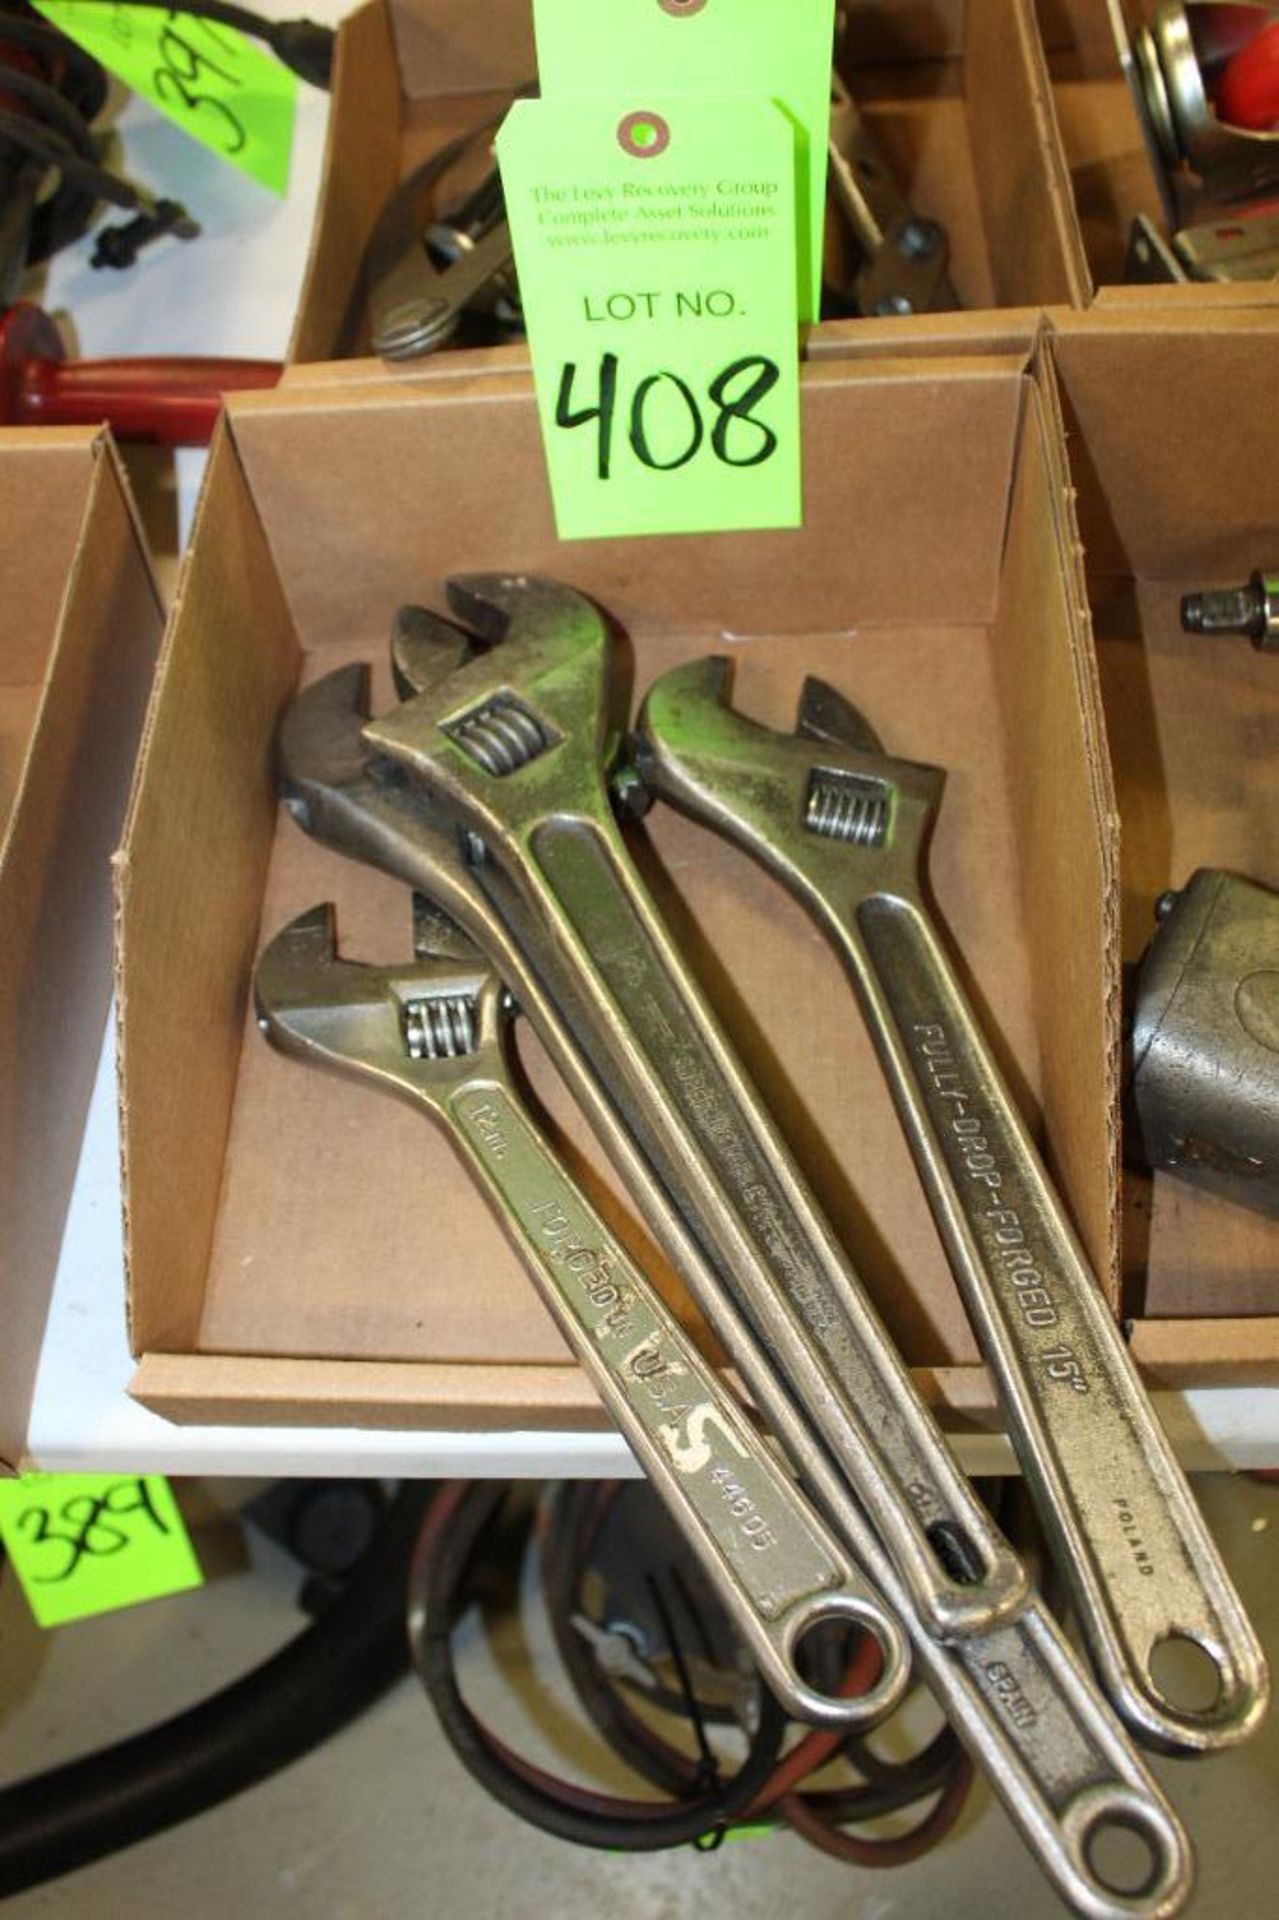 Lot of 4 Adjustable Wrenches - Sizes 12", 15", 18"